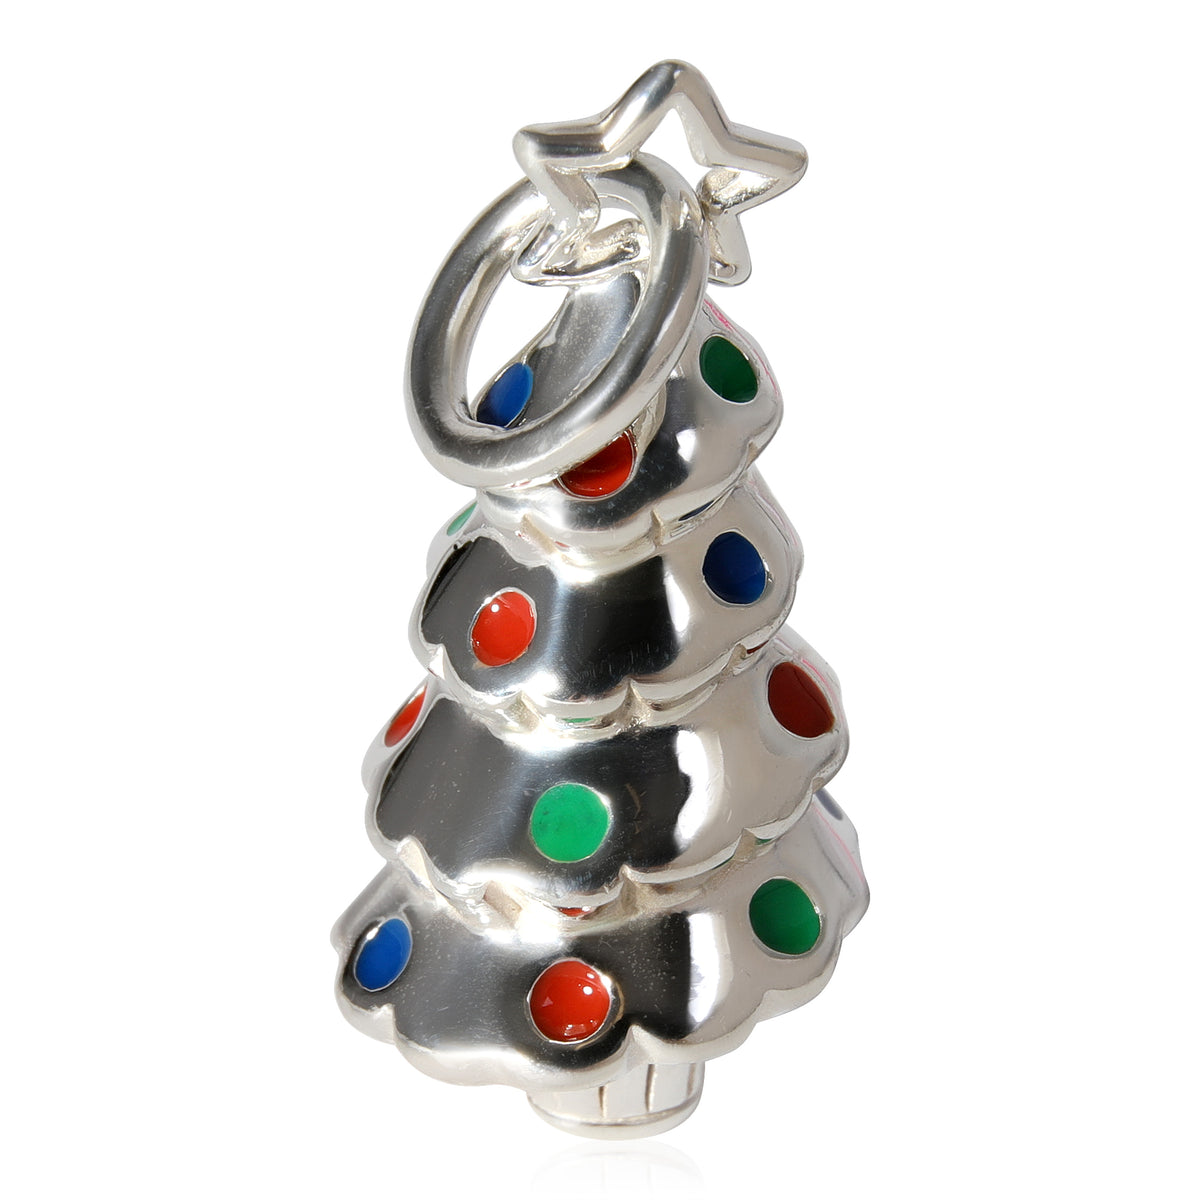 Tiffany & Co. Christmas Tree Charm in Sterling Silver